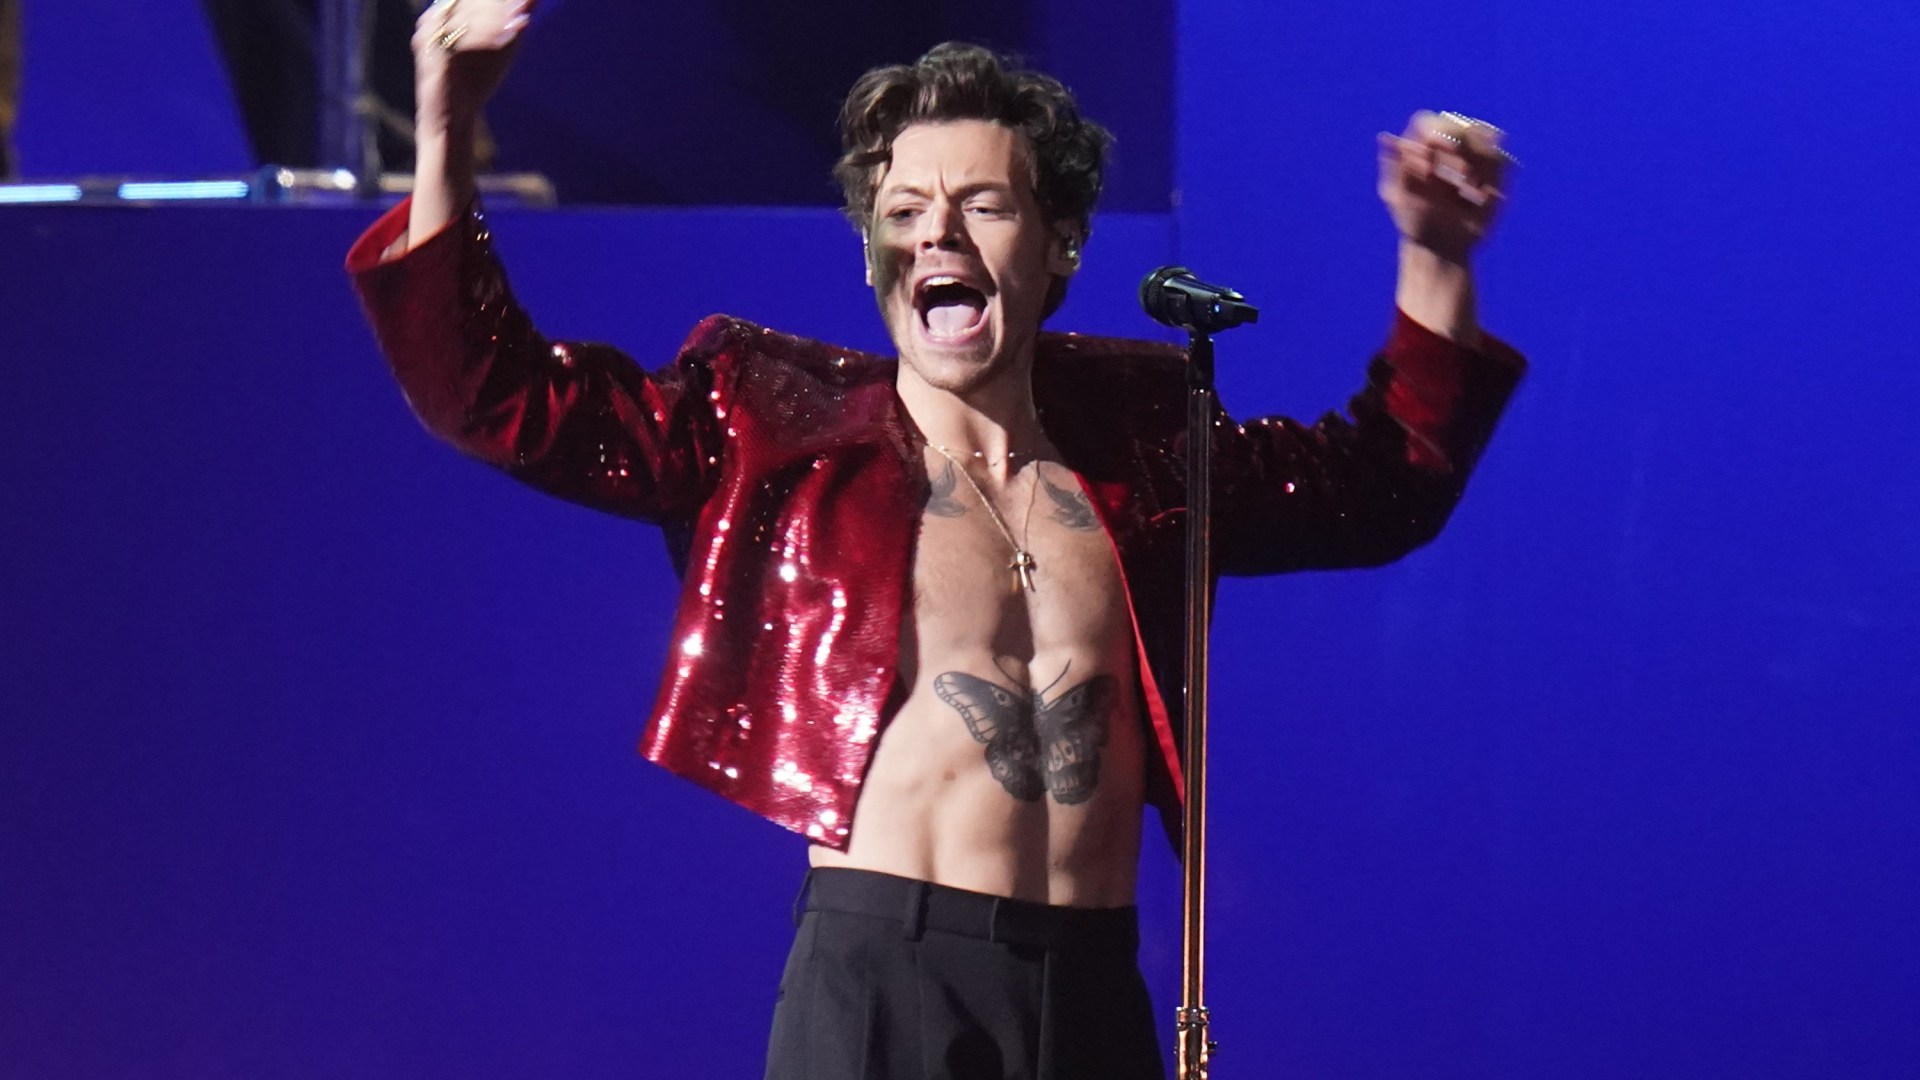 Harry Styles inundated with 8,000 stalker notes and wedding cards at his home – shocking encounter revealed!